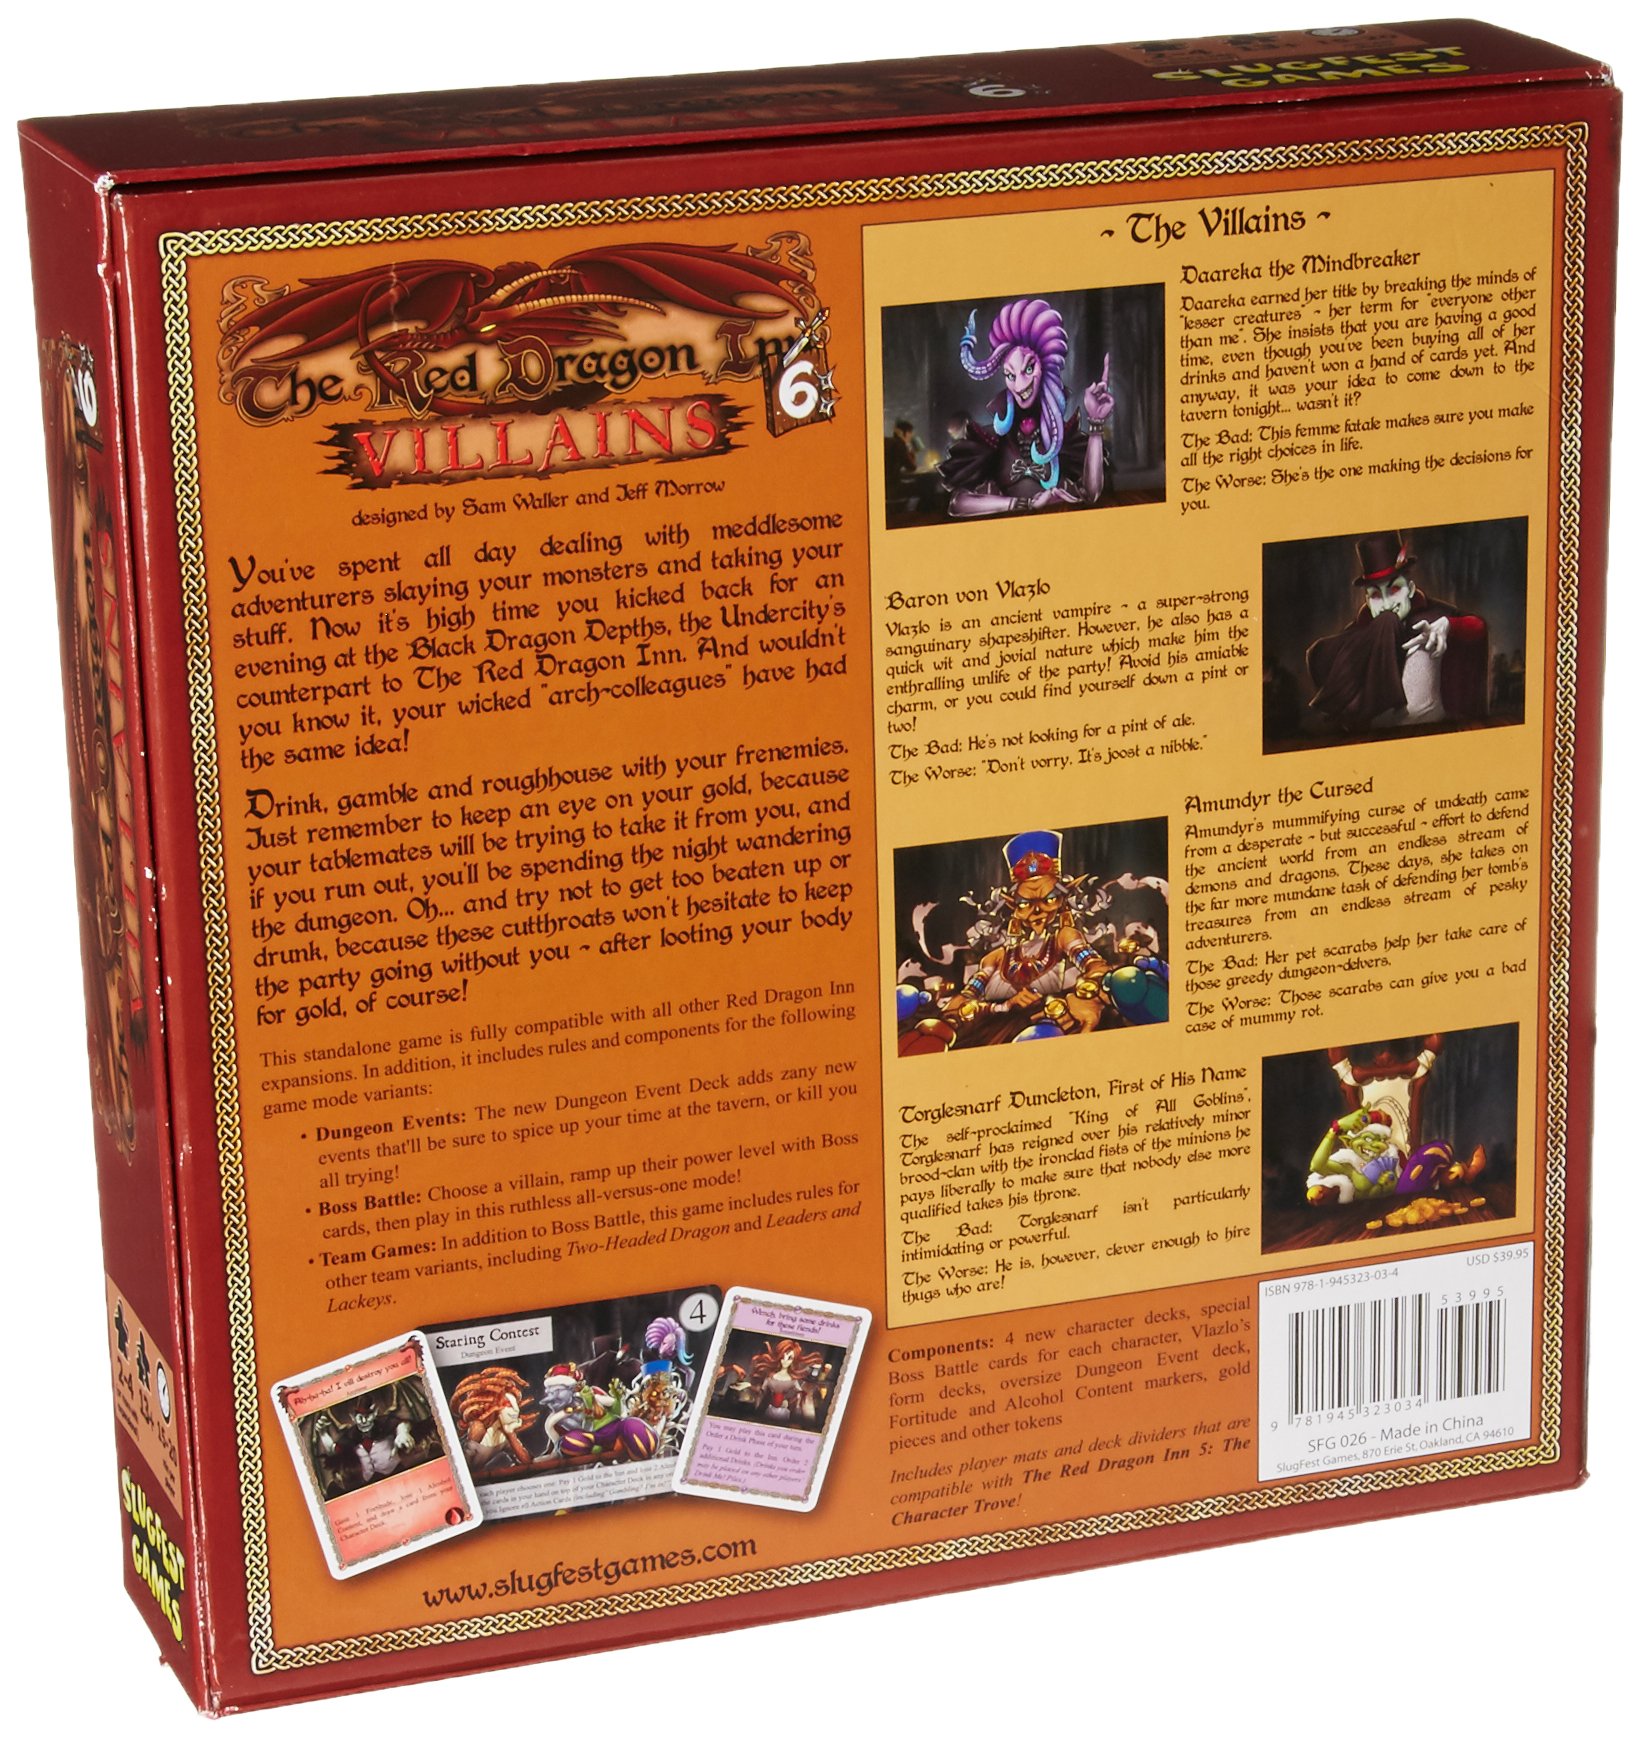 Slugfest Games: The Red Dragon Inn 6: Villains, Strategy Boxed Board Game, For 2 to 4 Players, 30 to 60 Minute Play Time, Ages 12 & Up